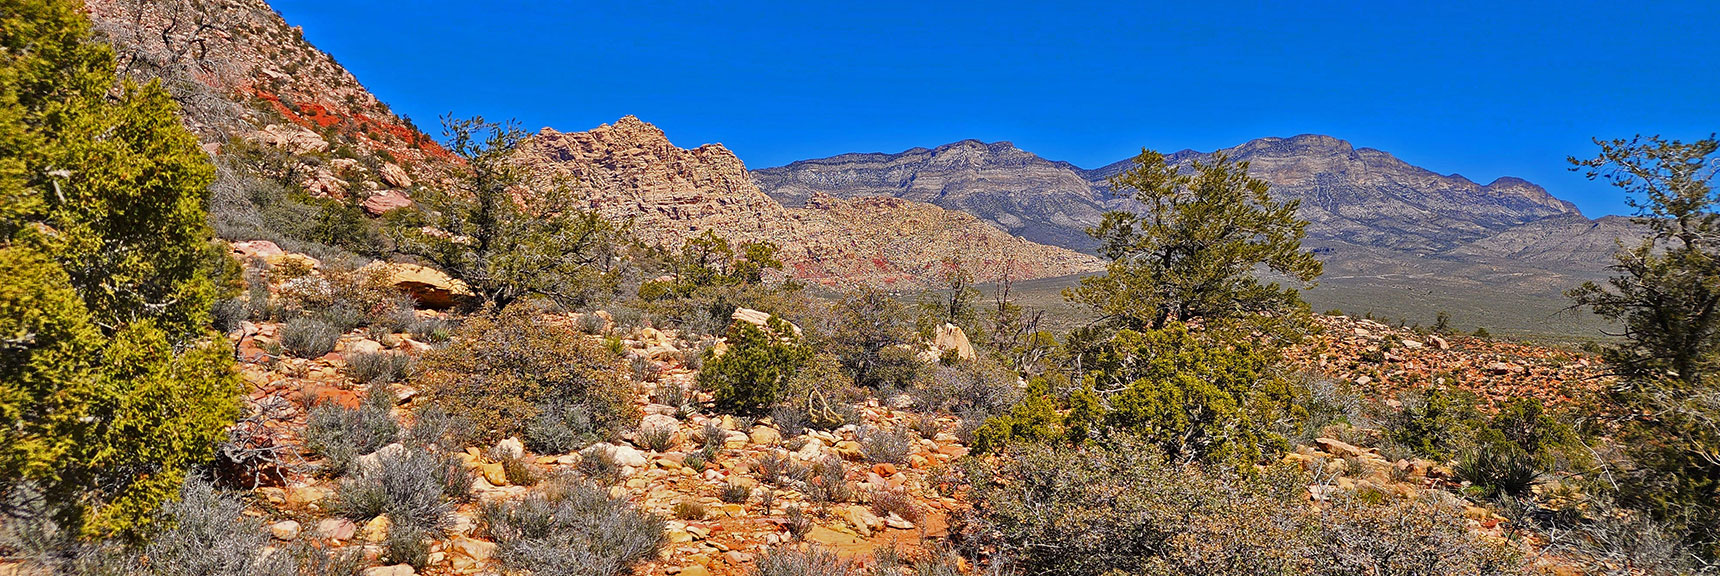 White Rock Mt. Now In View; La Madre Mt. Cliffs to Right | Dales Trail | Red Rock Canyon National Conservation Area, Nevada | David Smith | LasVegasAreaTrails.com